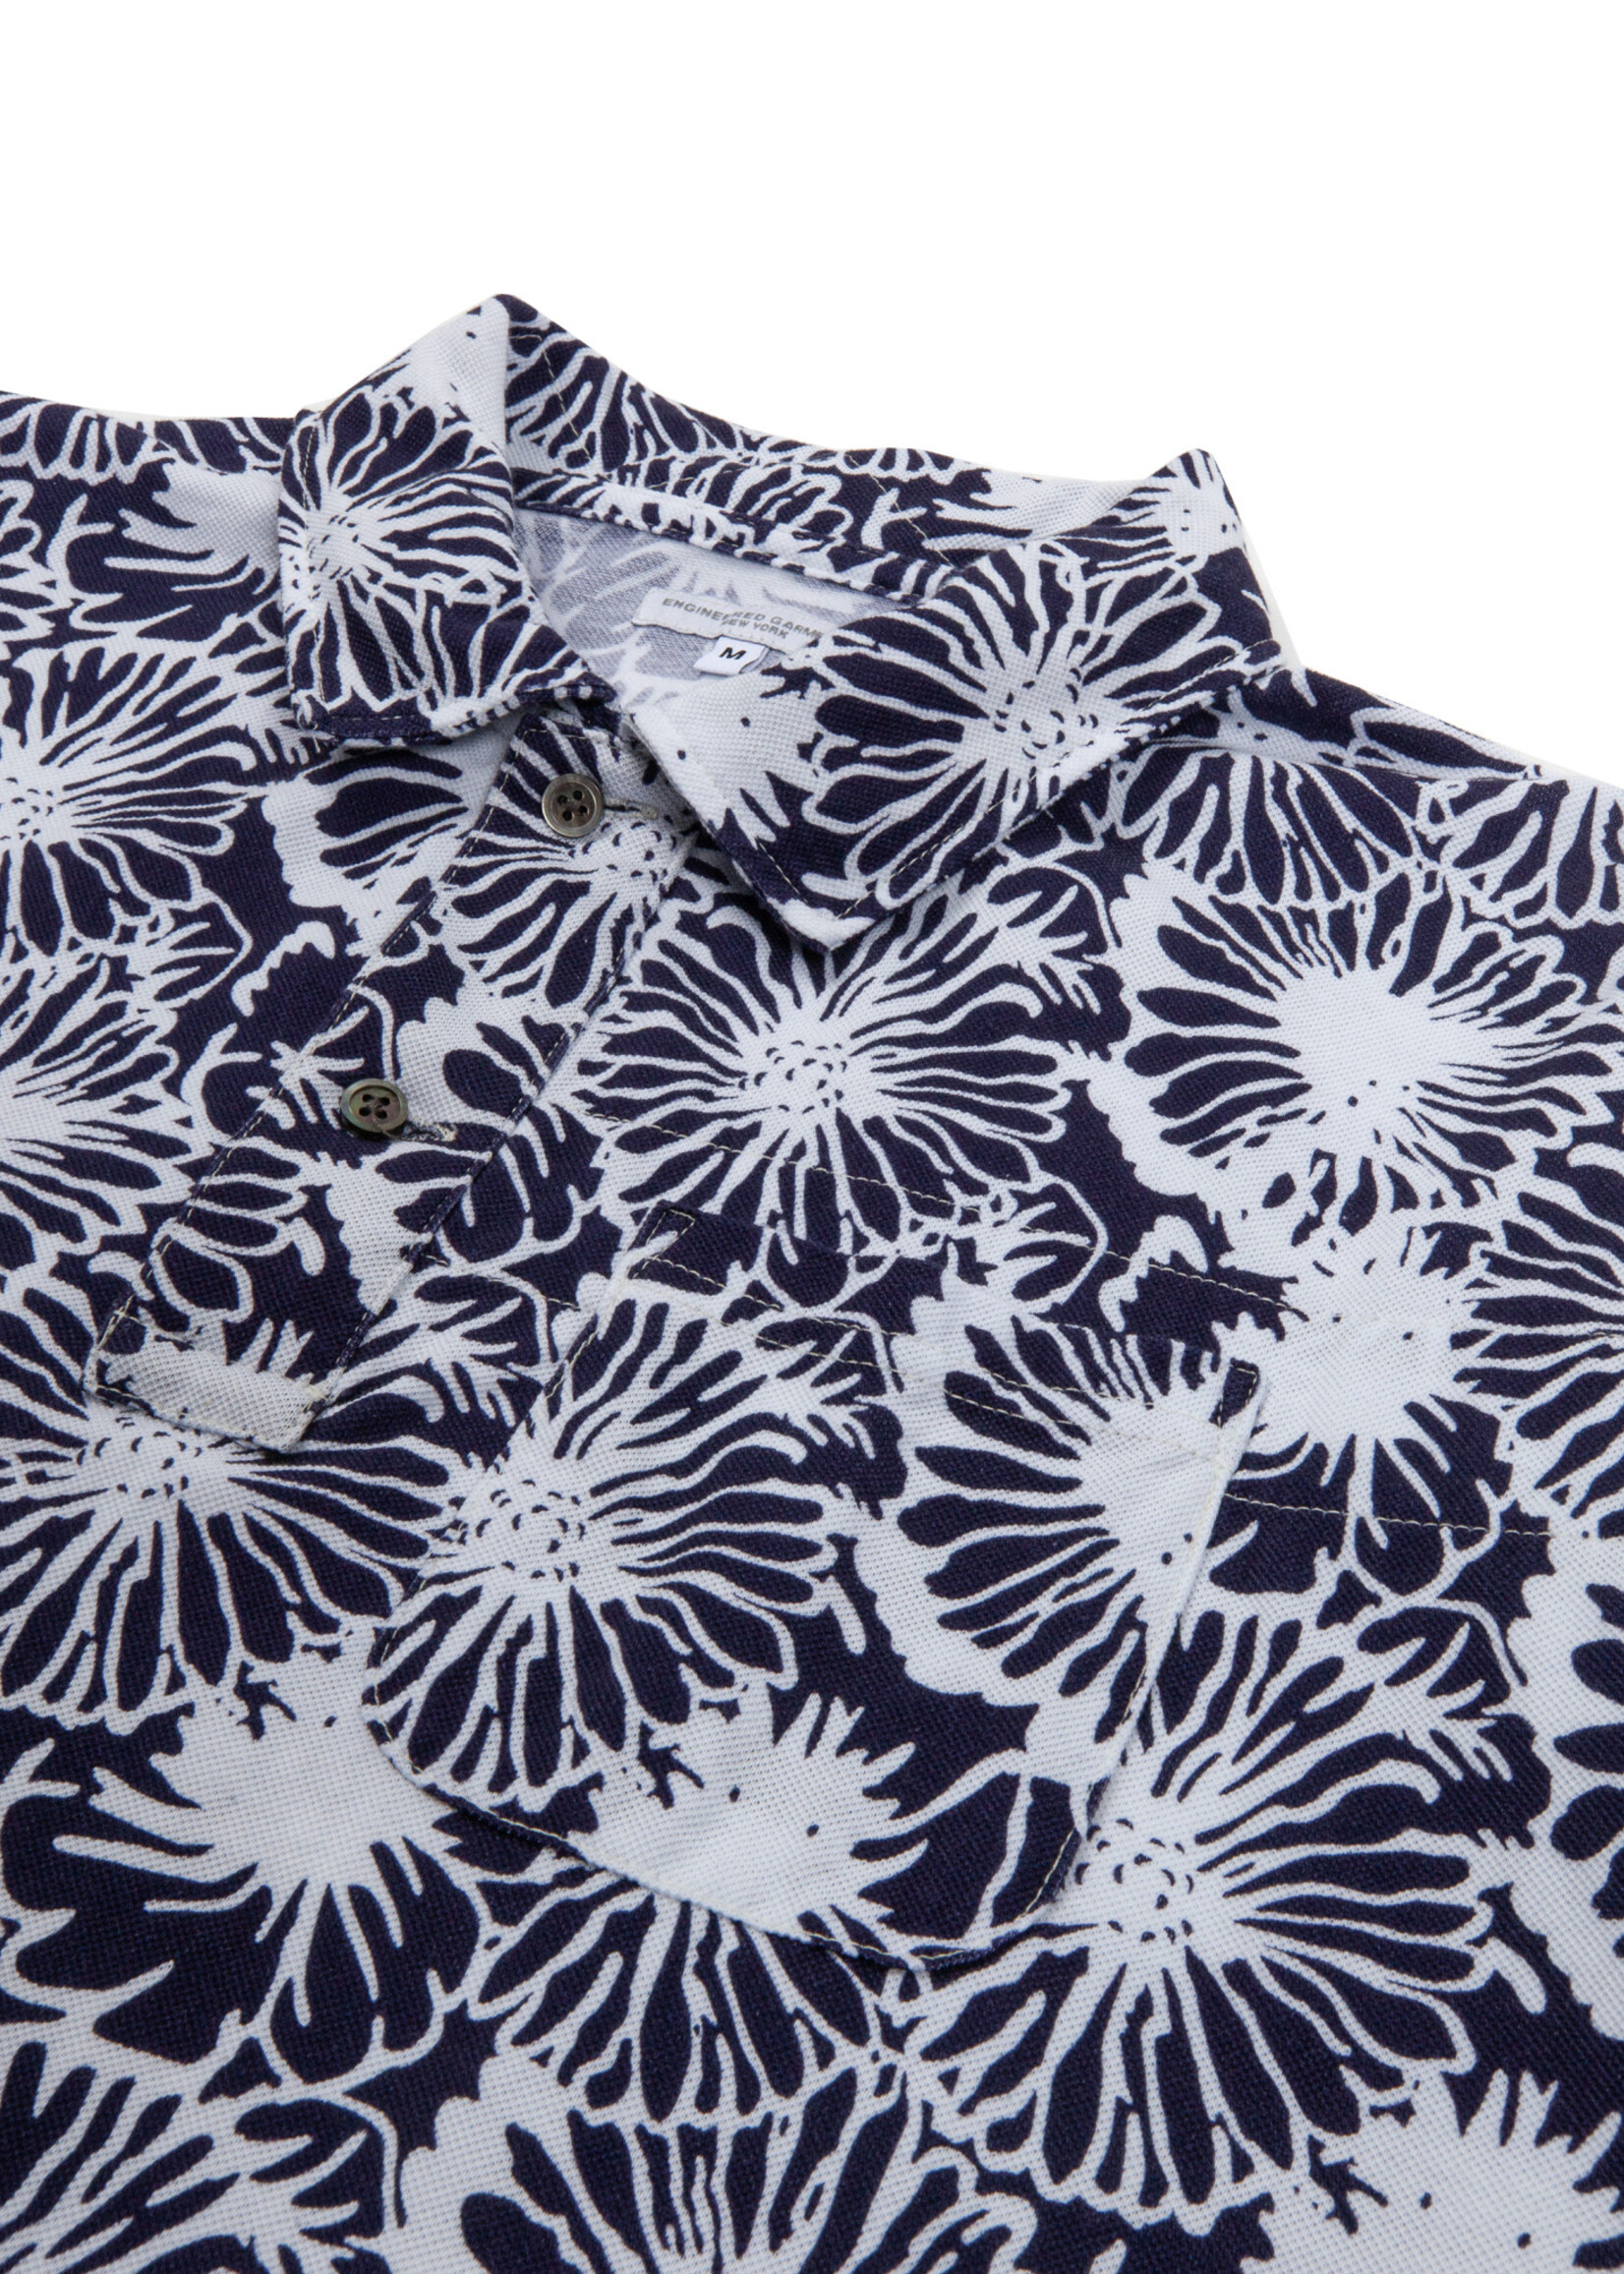 Engineered Garments Engineered Garments Polo Shirt Navy Cotton Floral Pique